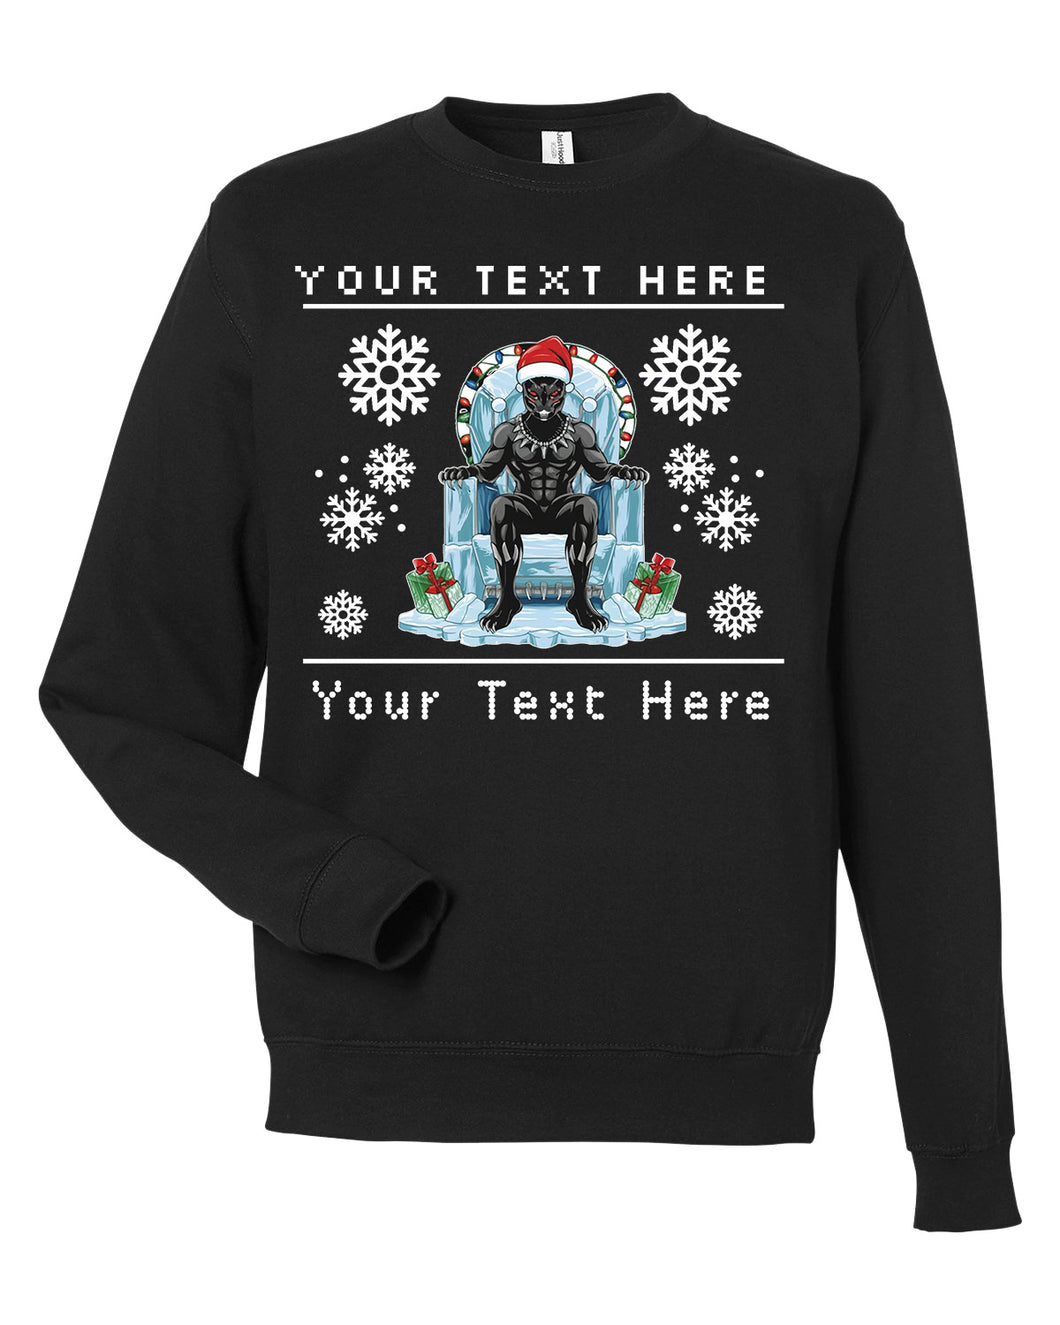 Black Panther Christmas Ugly Sweater